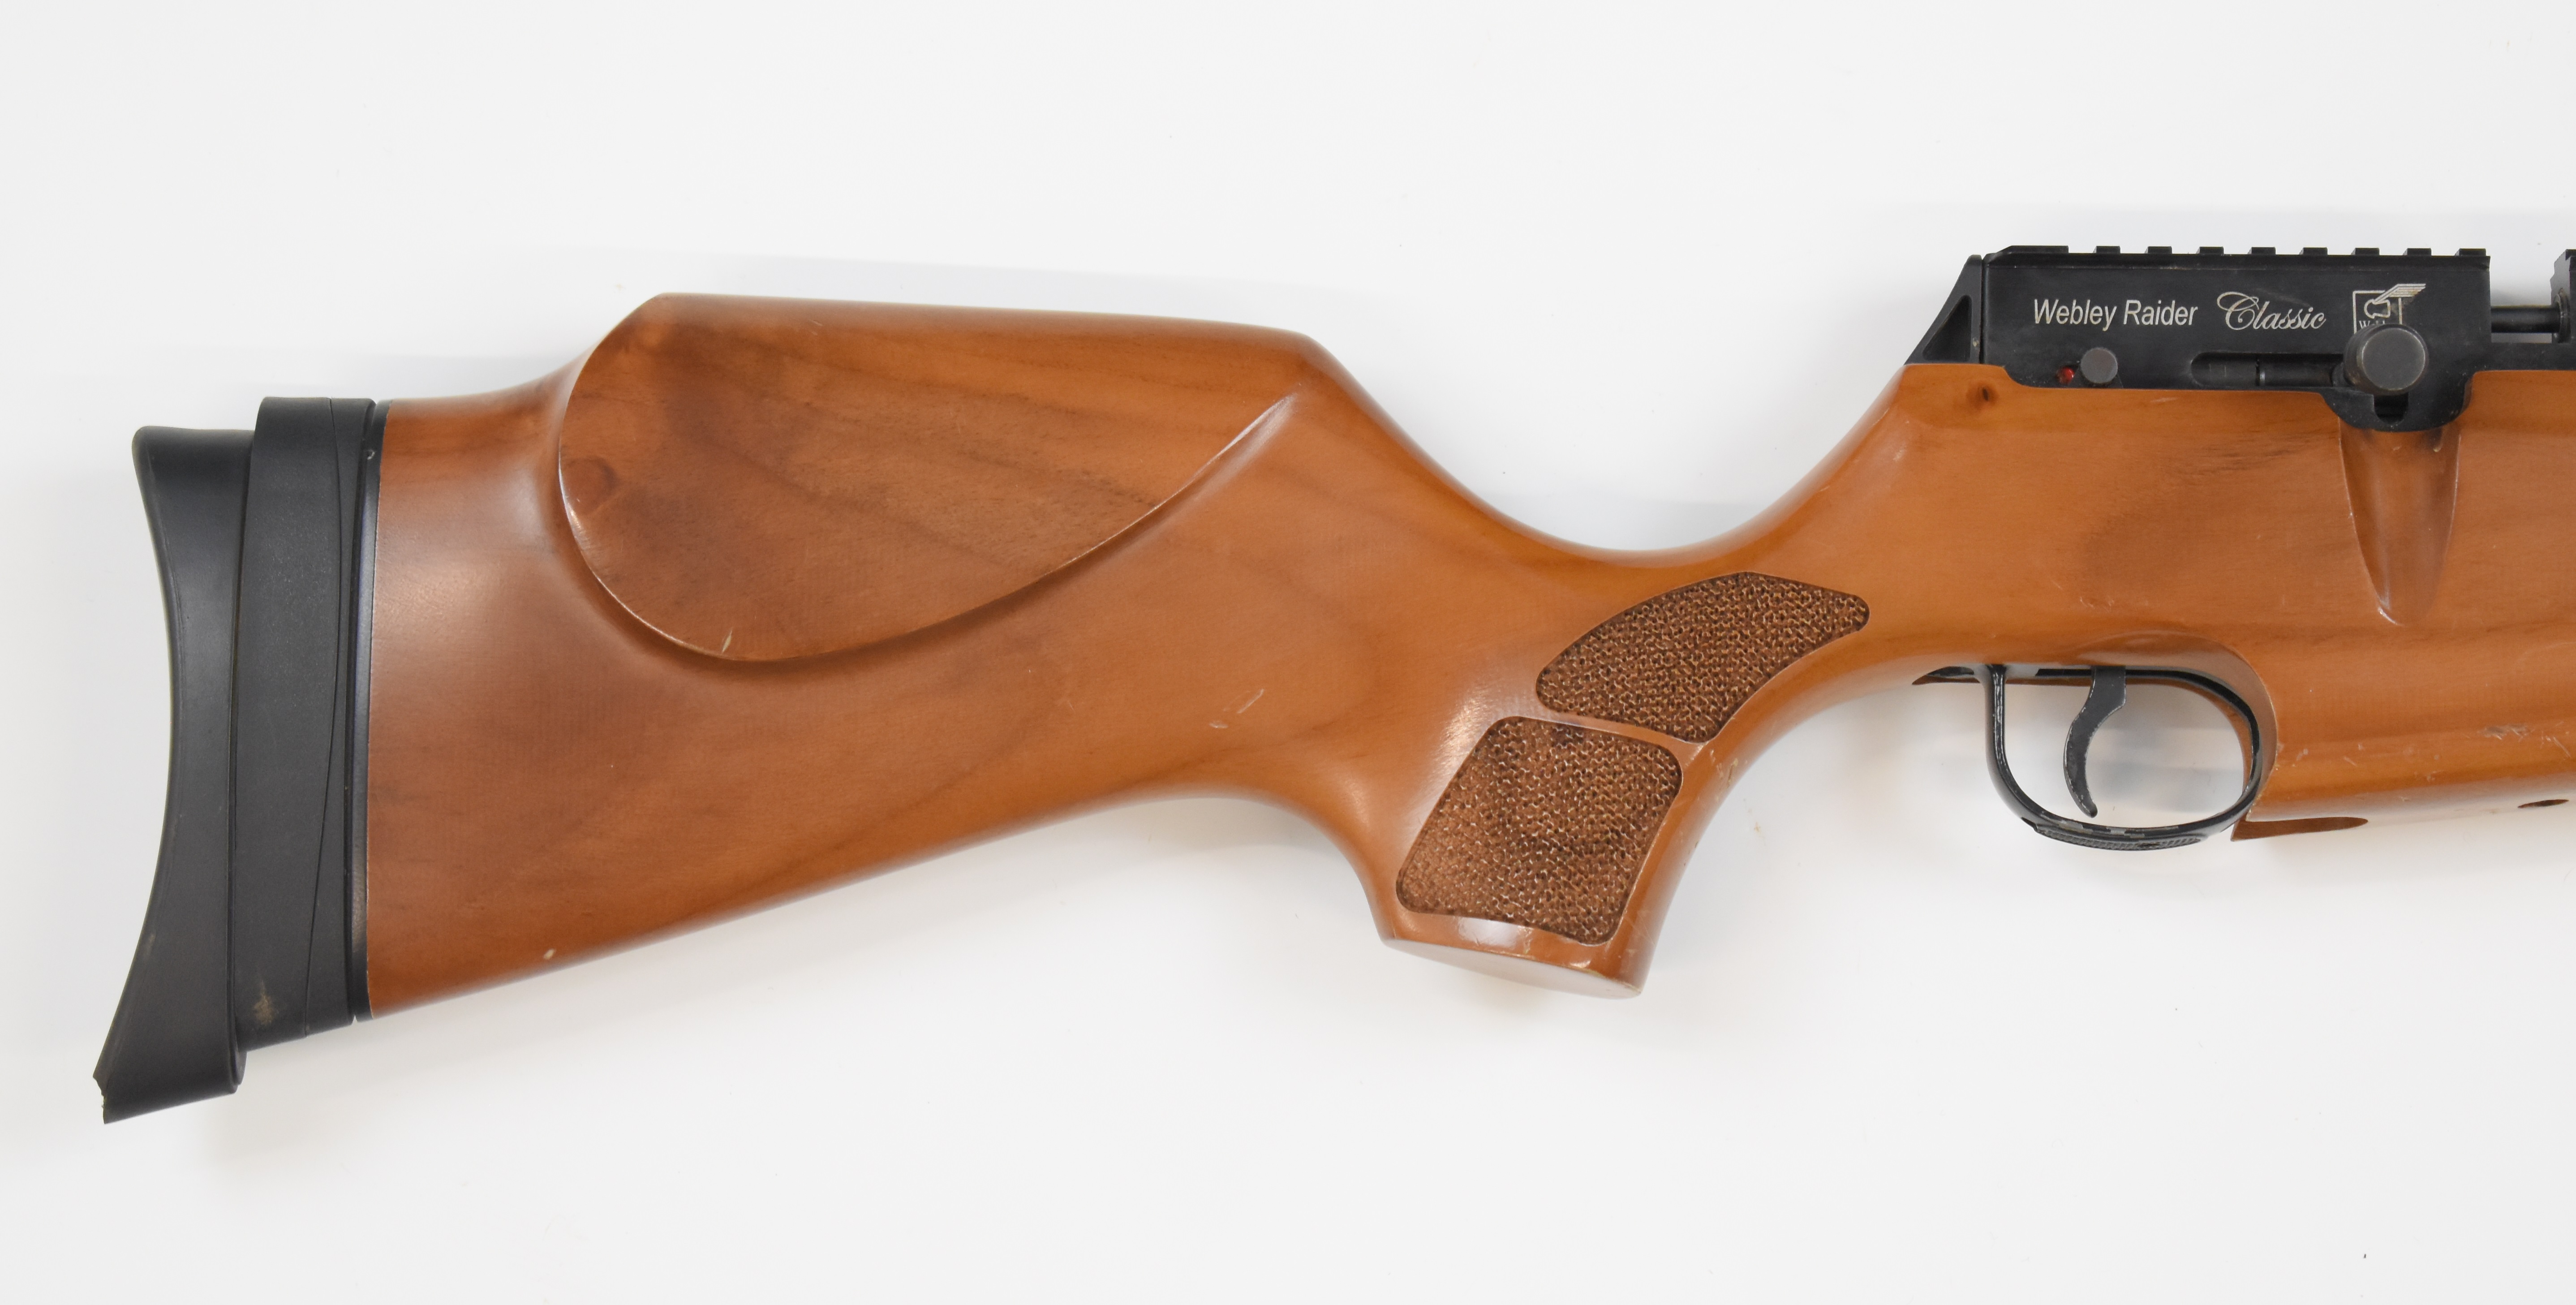 Webley Raider Classic .22 PCP air rifle with textured semi-pistol grip and forend, raised cheek - Image 3 of 10